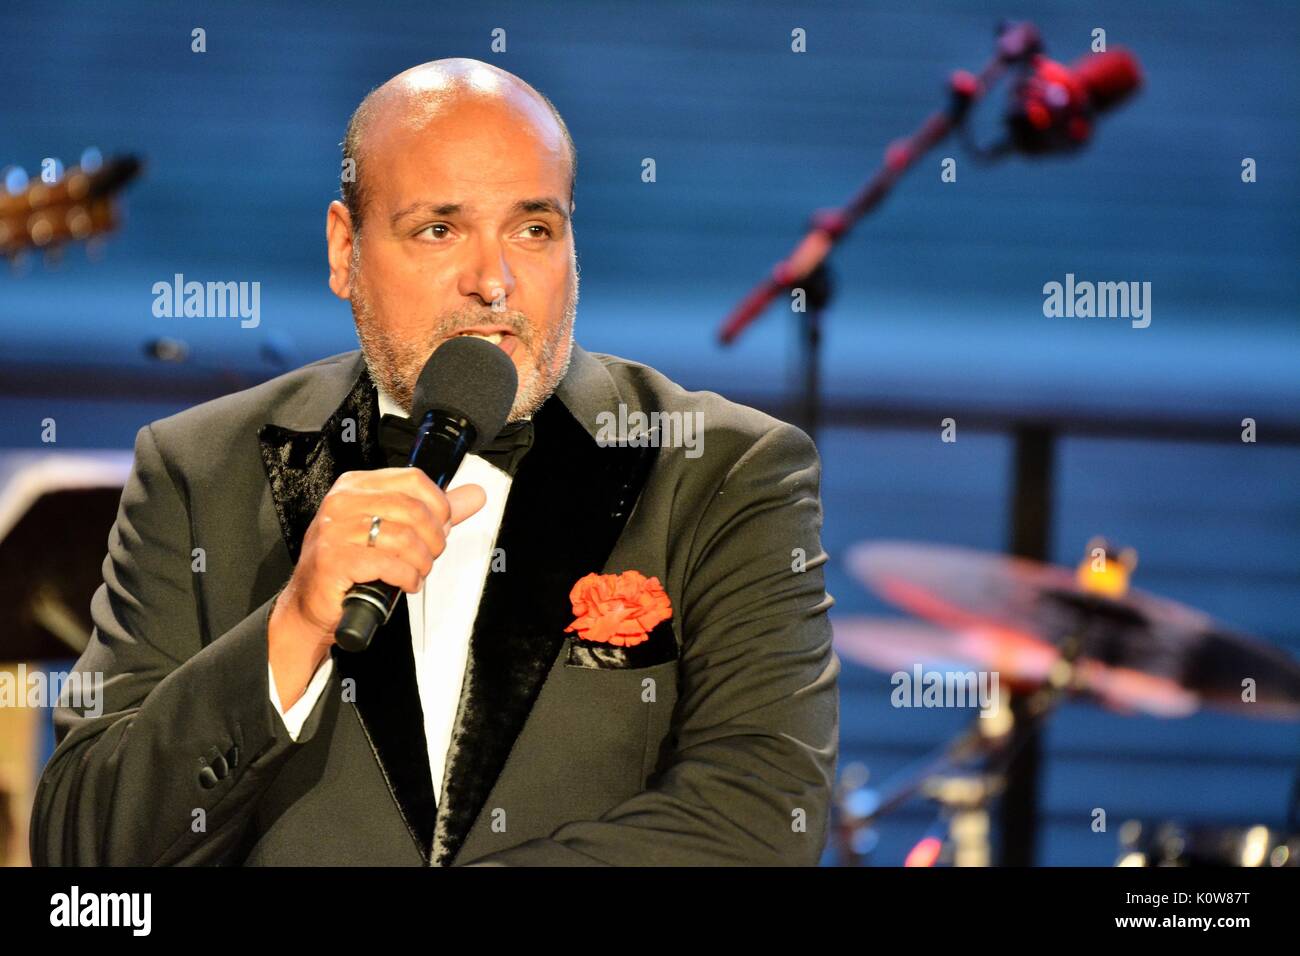 Ötigheim, Germany, 24th August, 2017, Open Air '20 Jahre Marshall & Alexander' Featuring Marc Marshall and Jay Alexander Credit: mediensegel/Alamy Live News Stock Photo